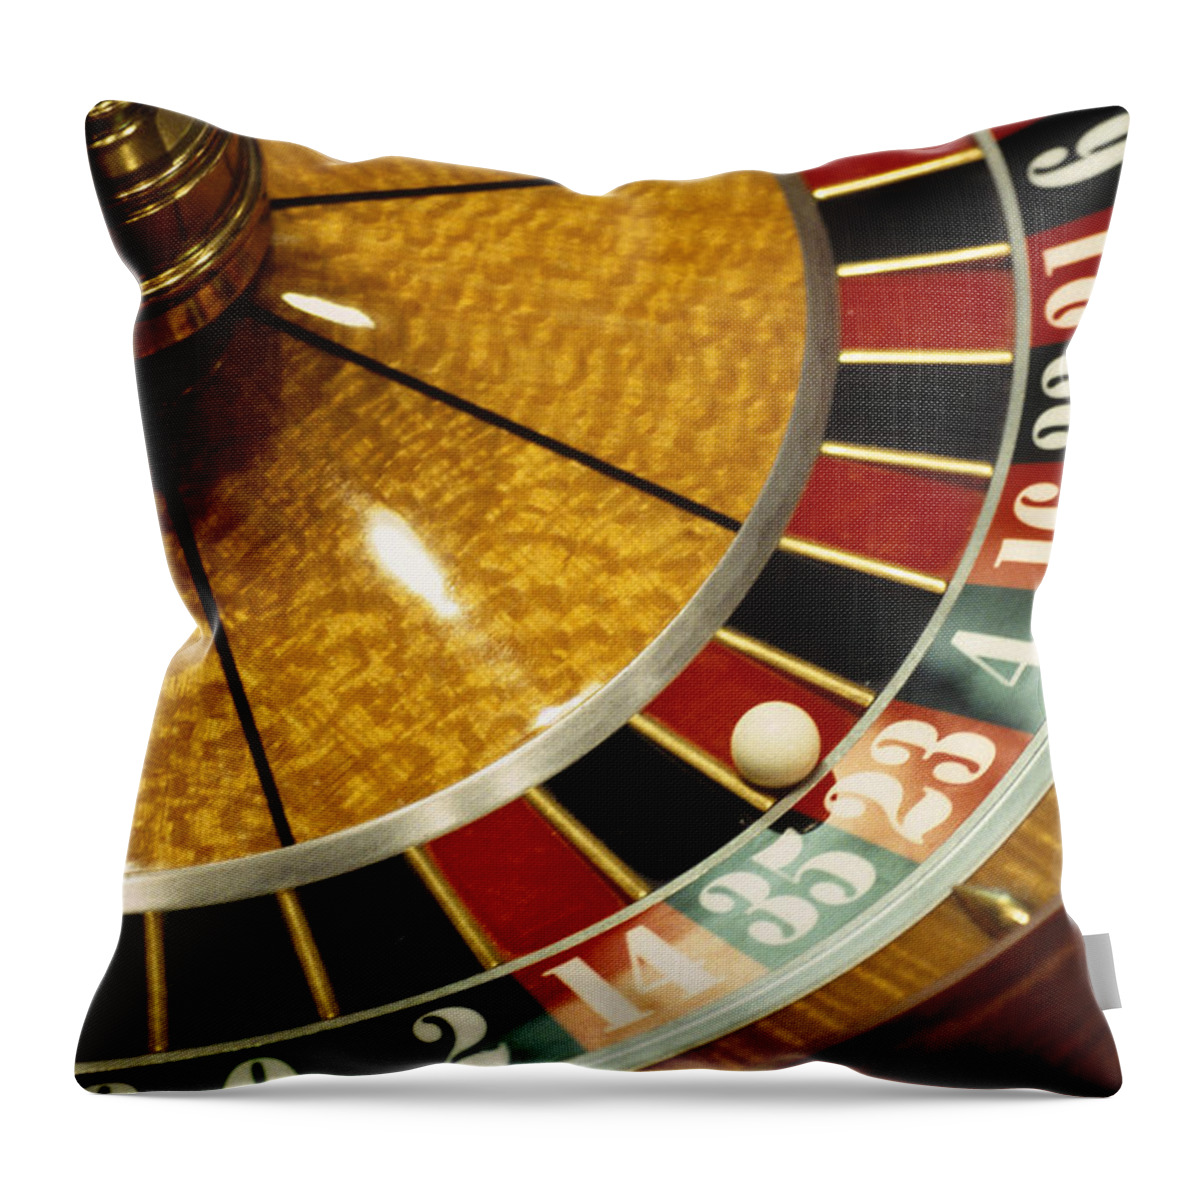 Ball Throw Pillow featuring the photograph Close-up Of A Roulette Wheel by Barry Winiker